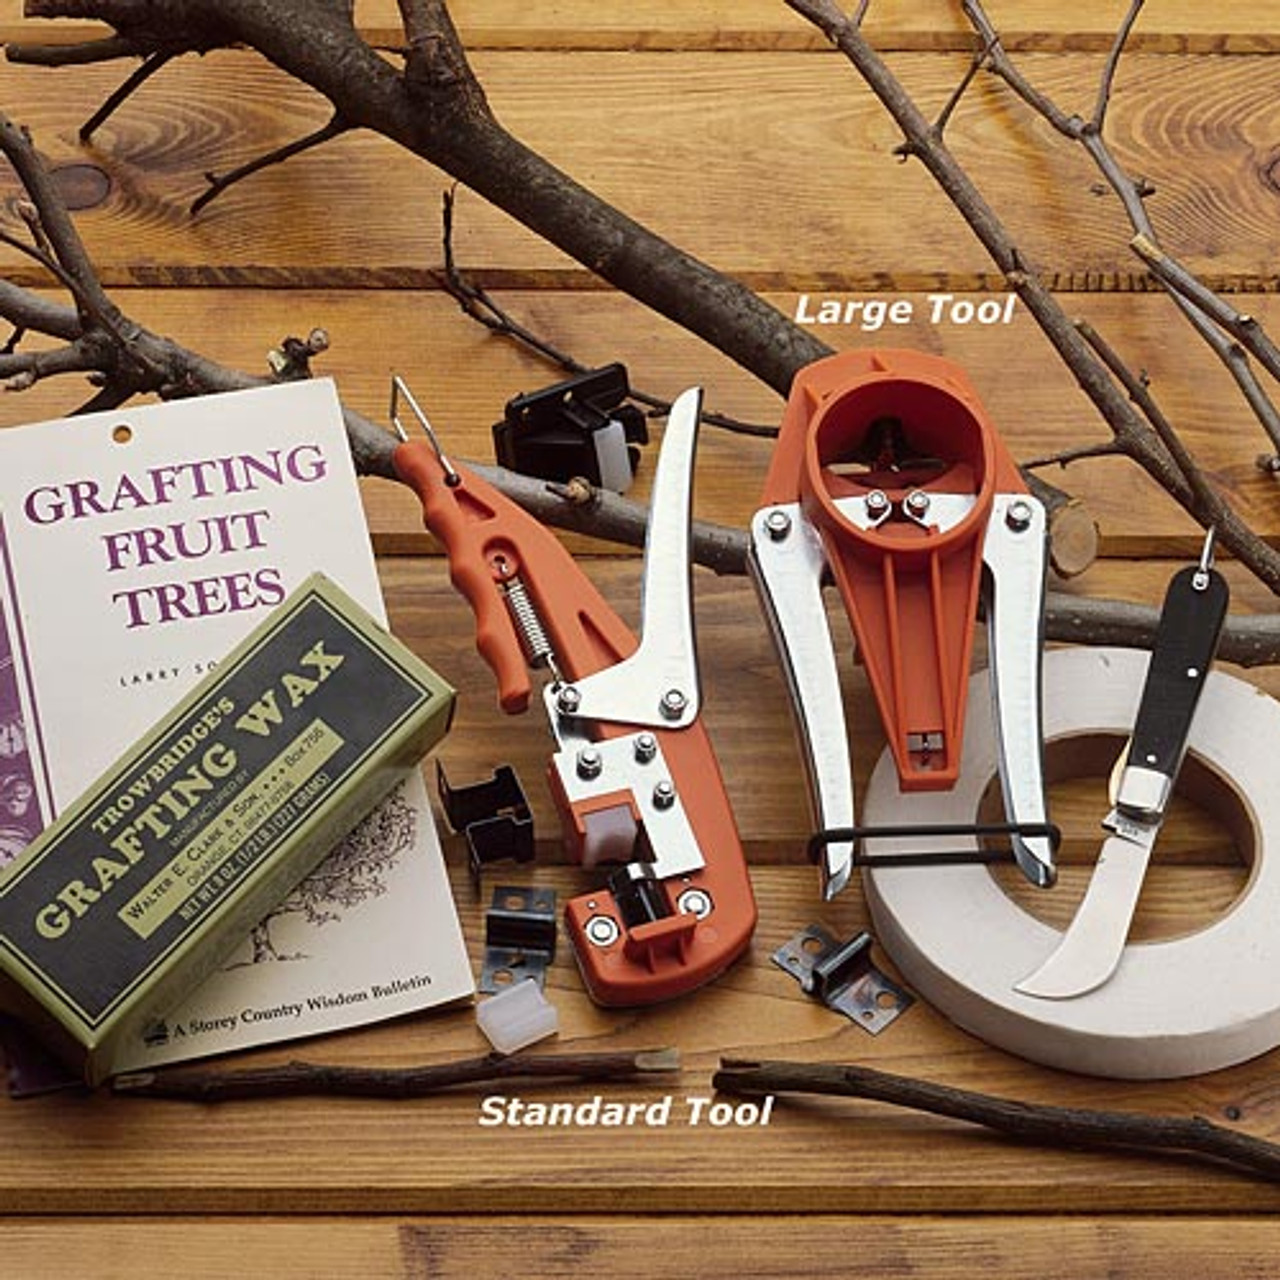 Professional Grafting Tool- Standard Size - Cuts to 1/2 Stock